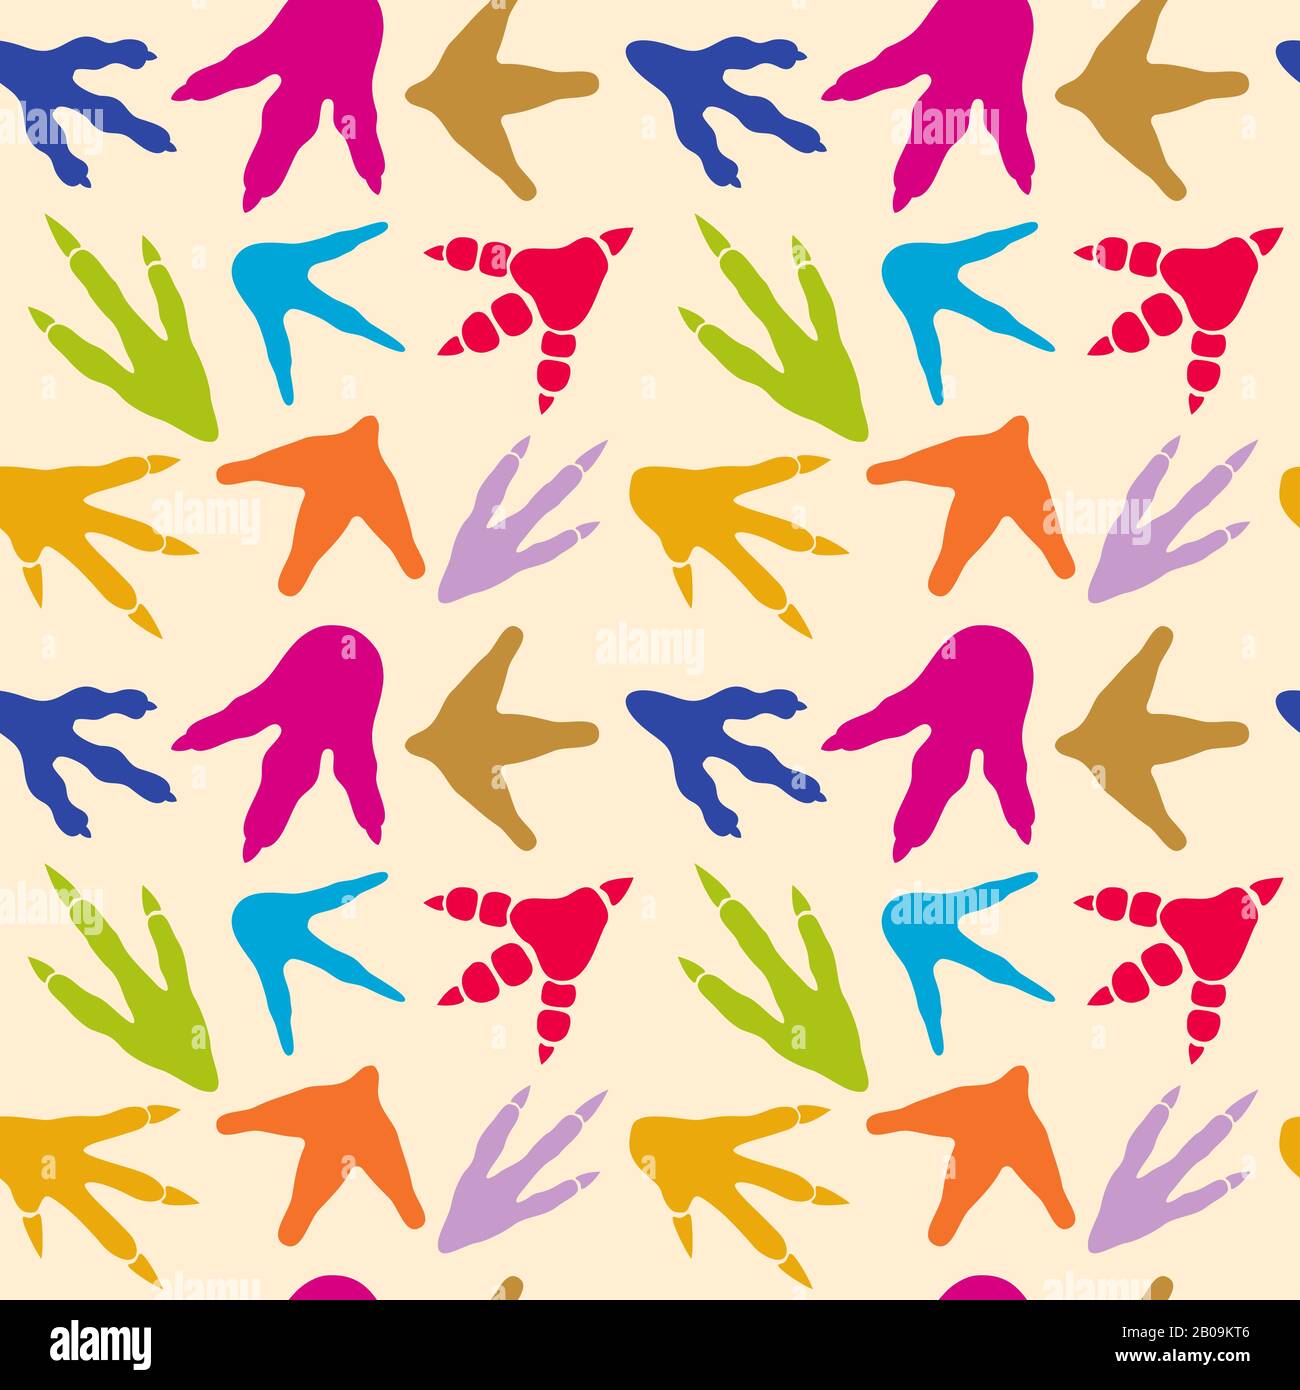 Dinosaur footprints vector seamless pattern. Background with color footprins animal, illustration of dinosaur footprints Stock Vector